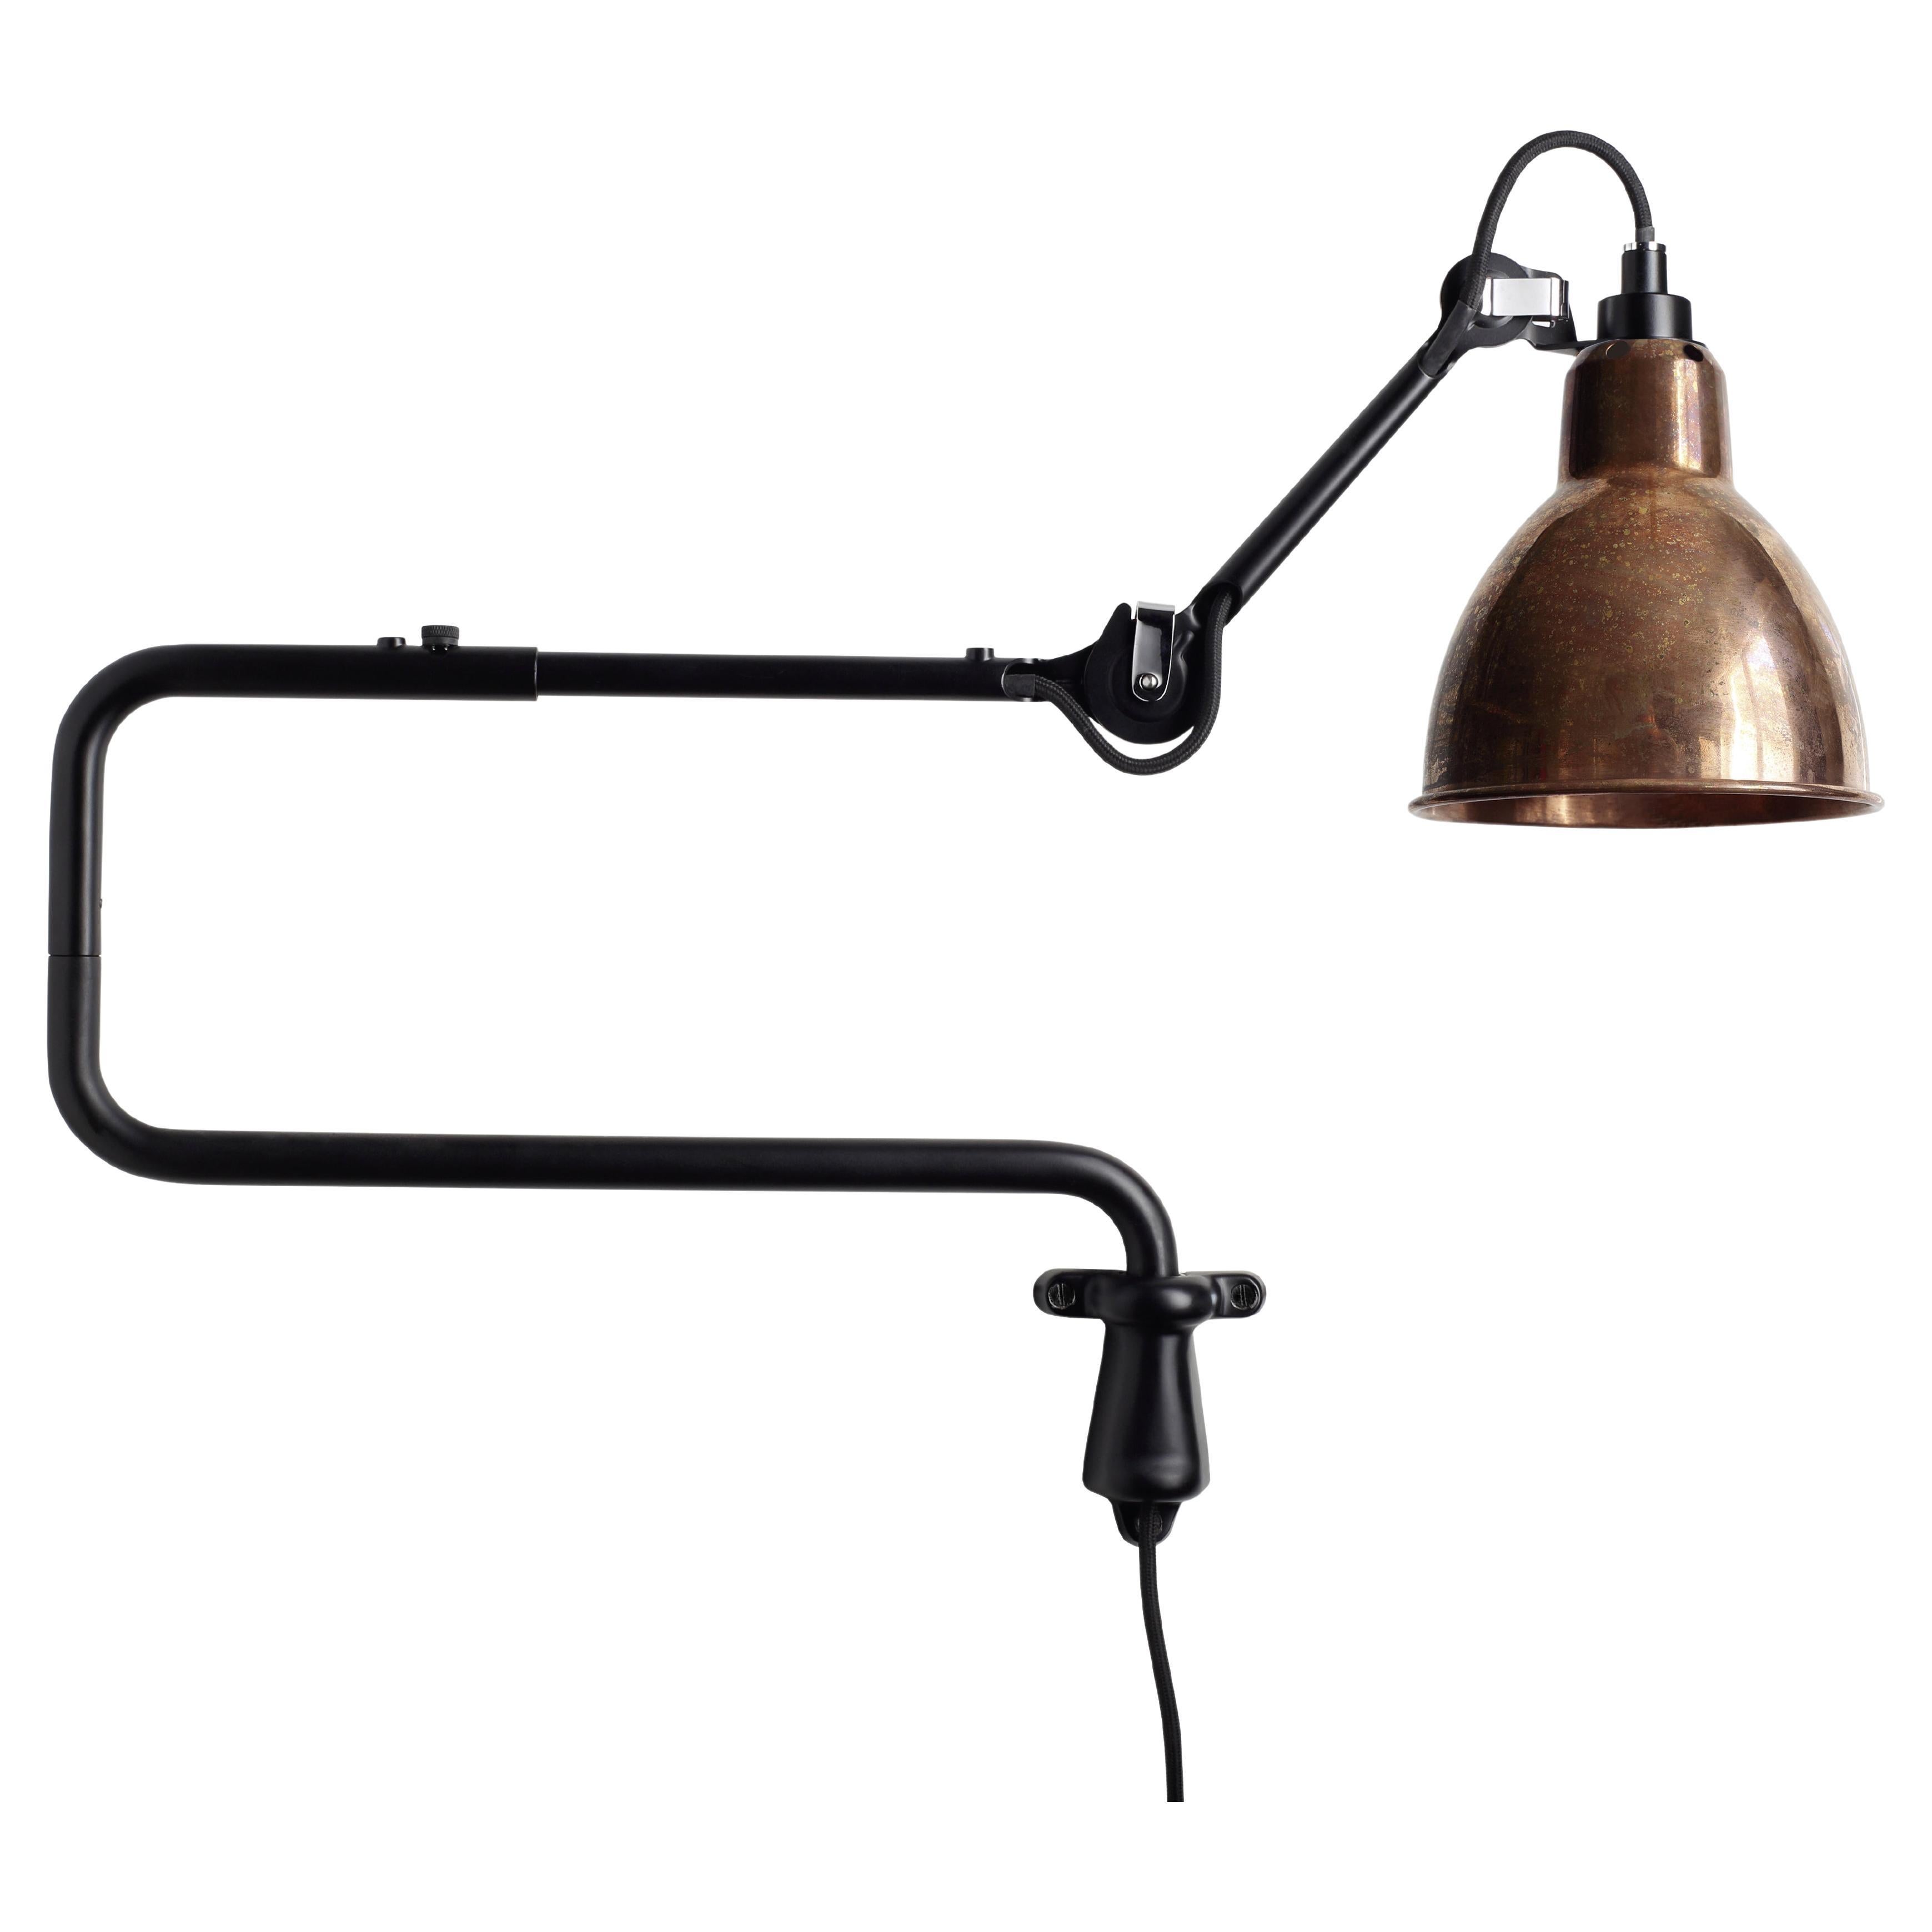 DCW Editions La Lampe Gras N°303 Wall Lamp in Black Arm and Raw Copper Shade For Sale